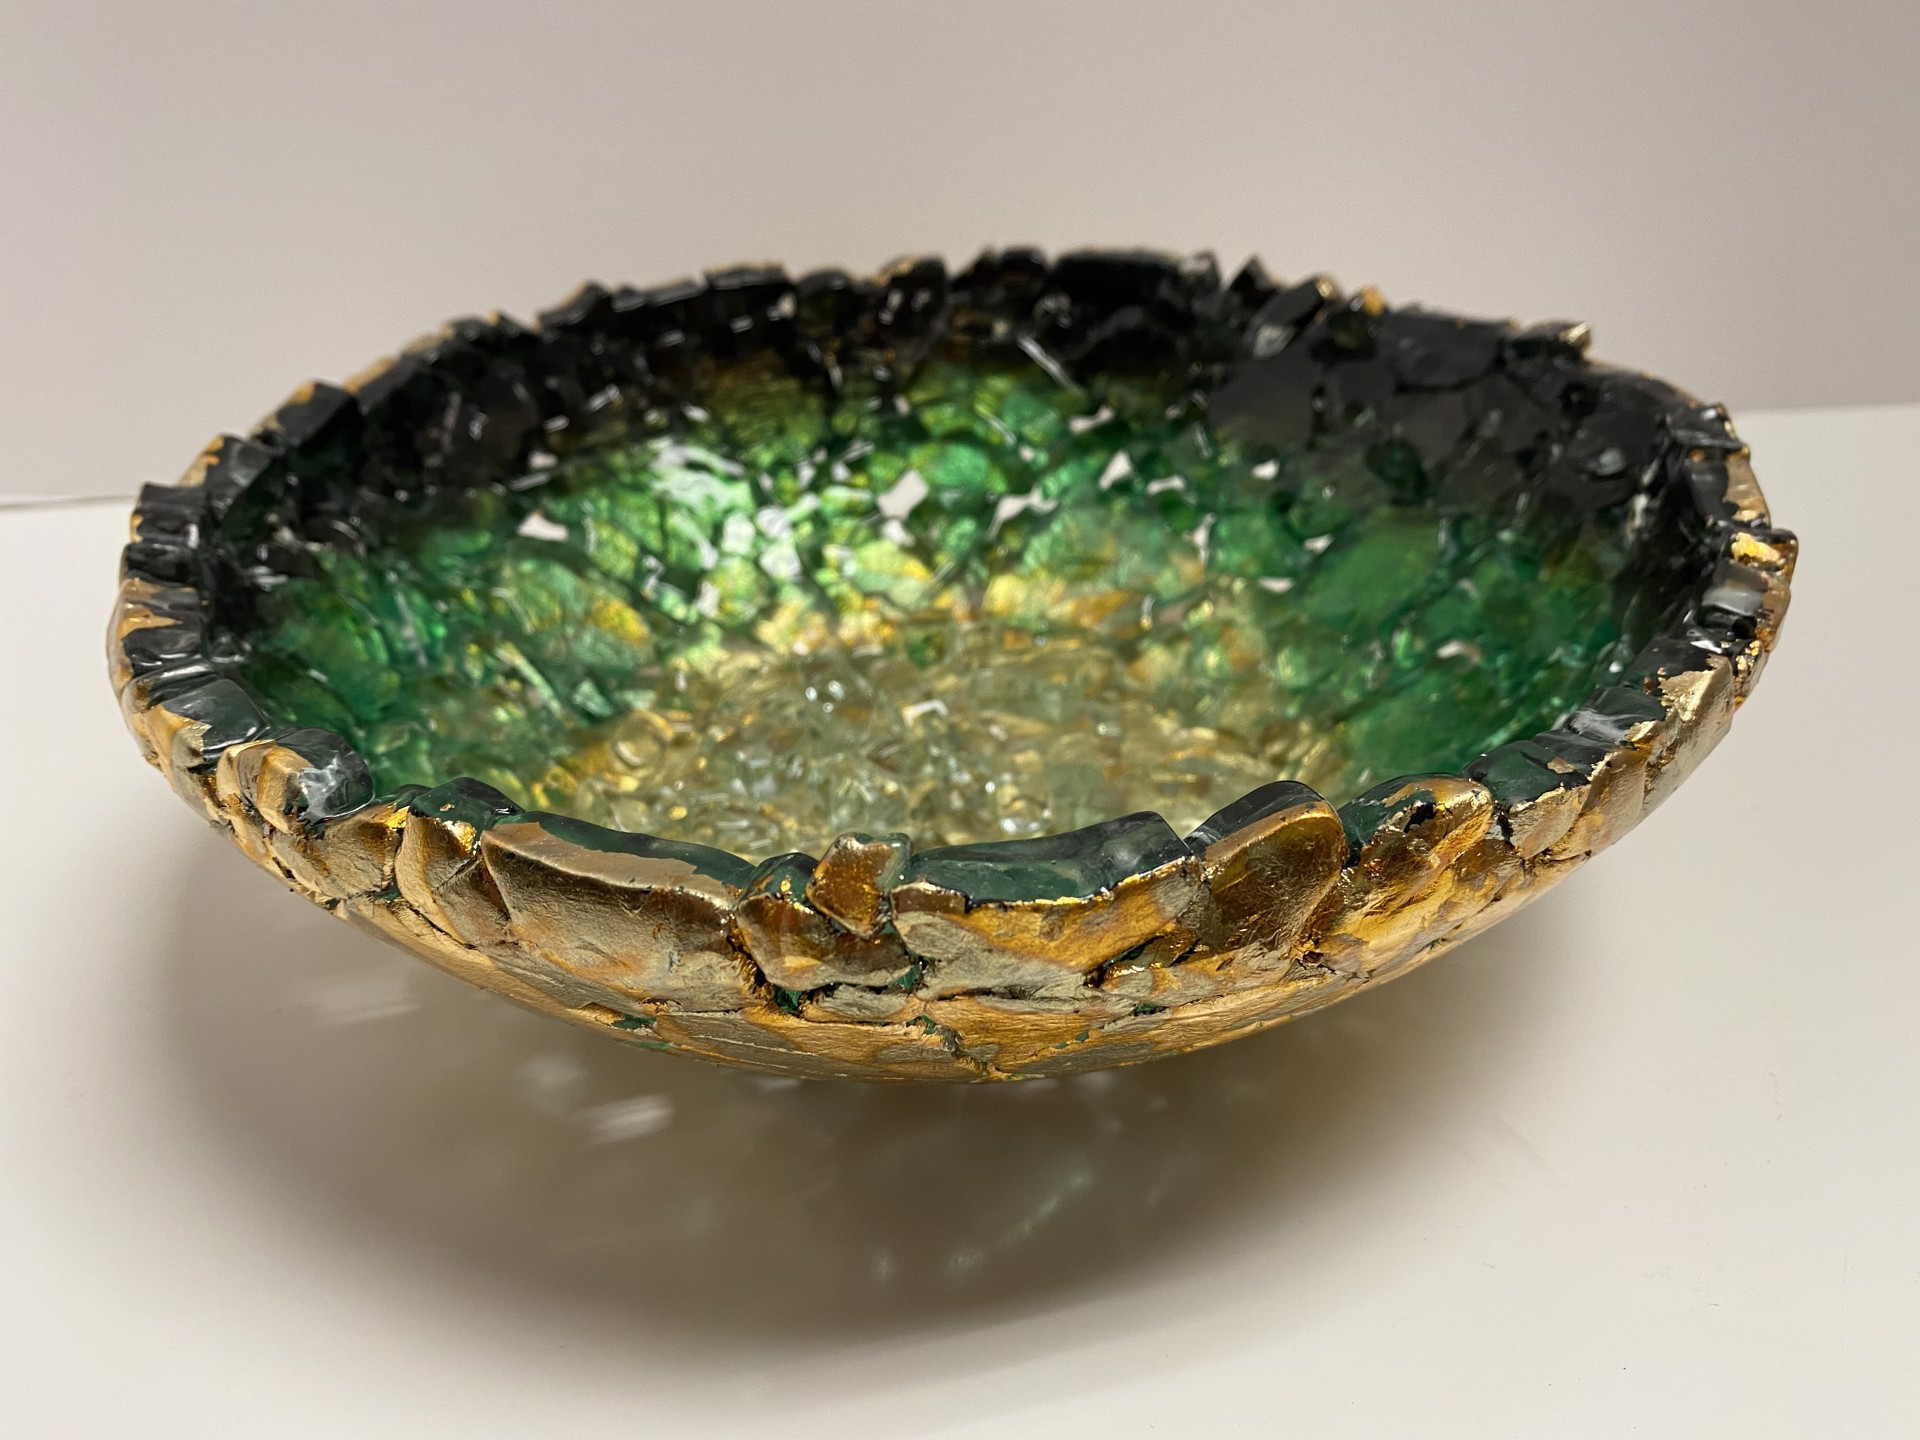 Amador Vessel by Mira Woodworth